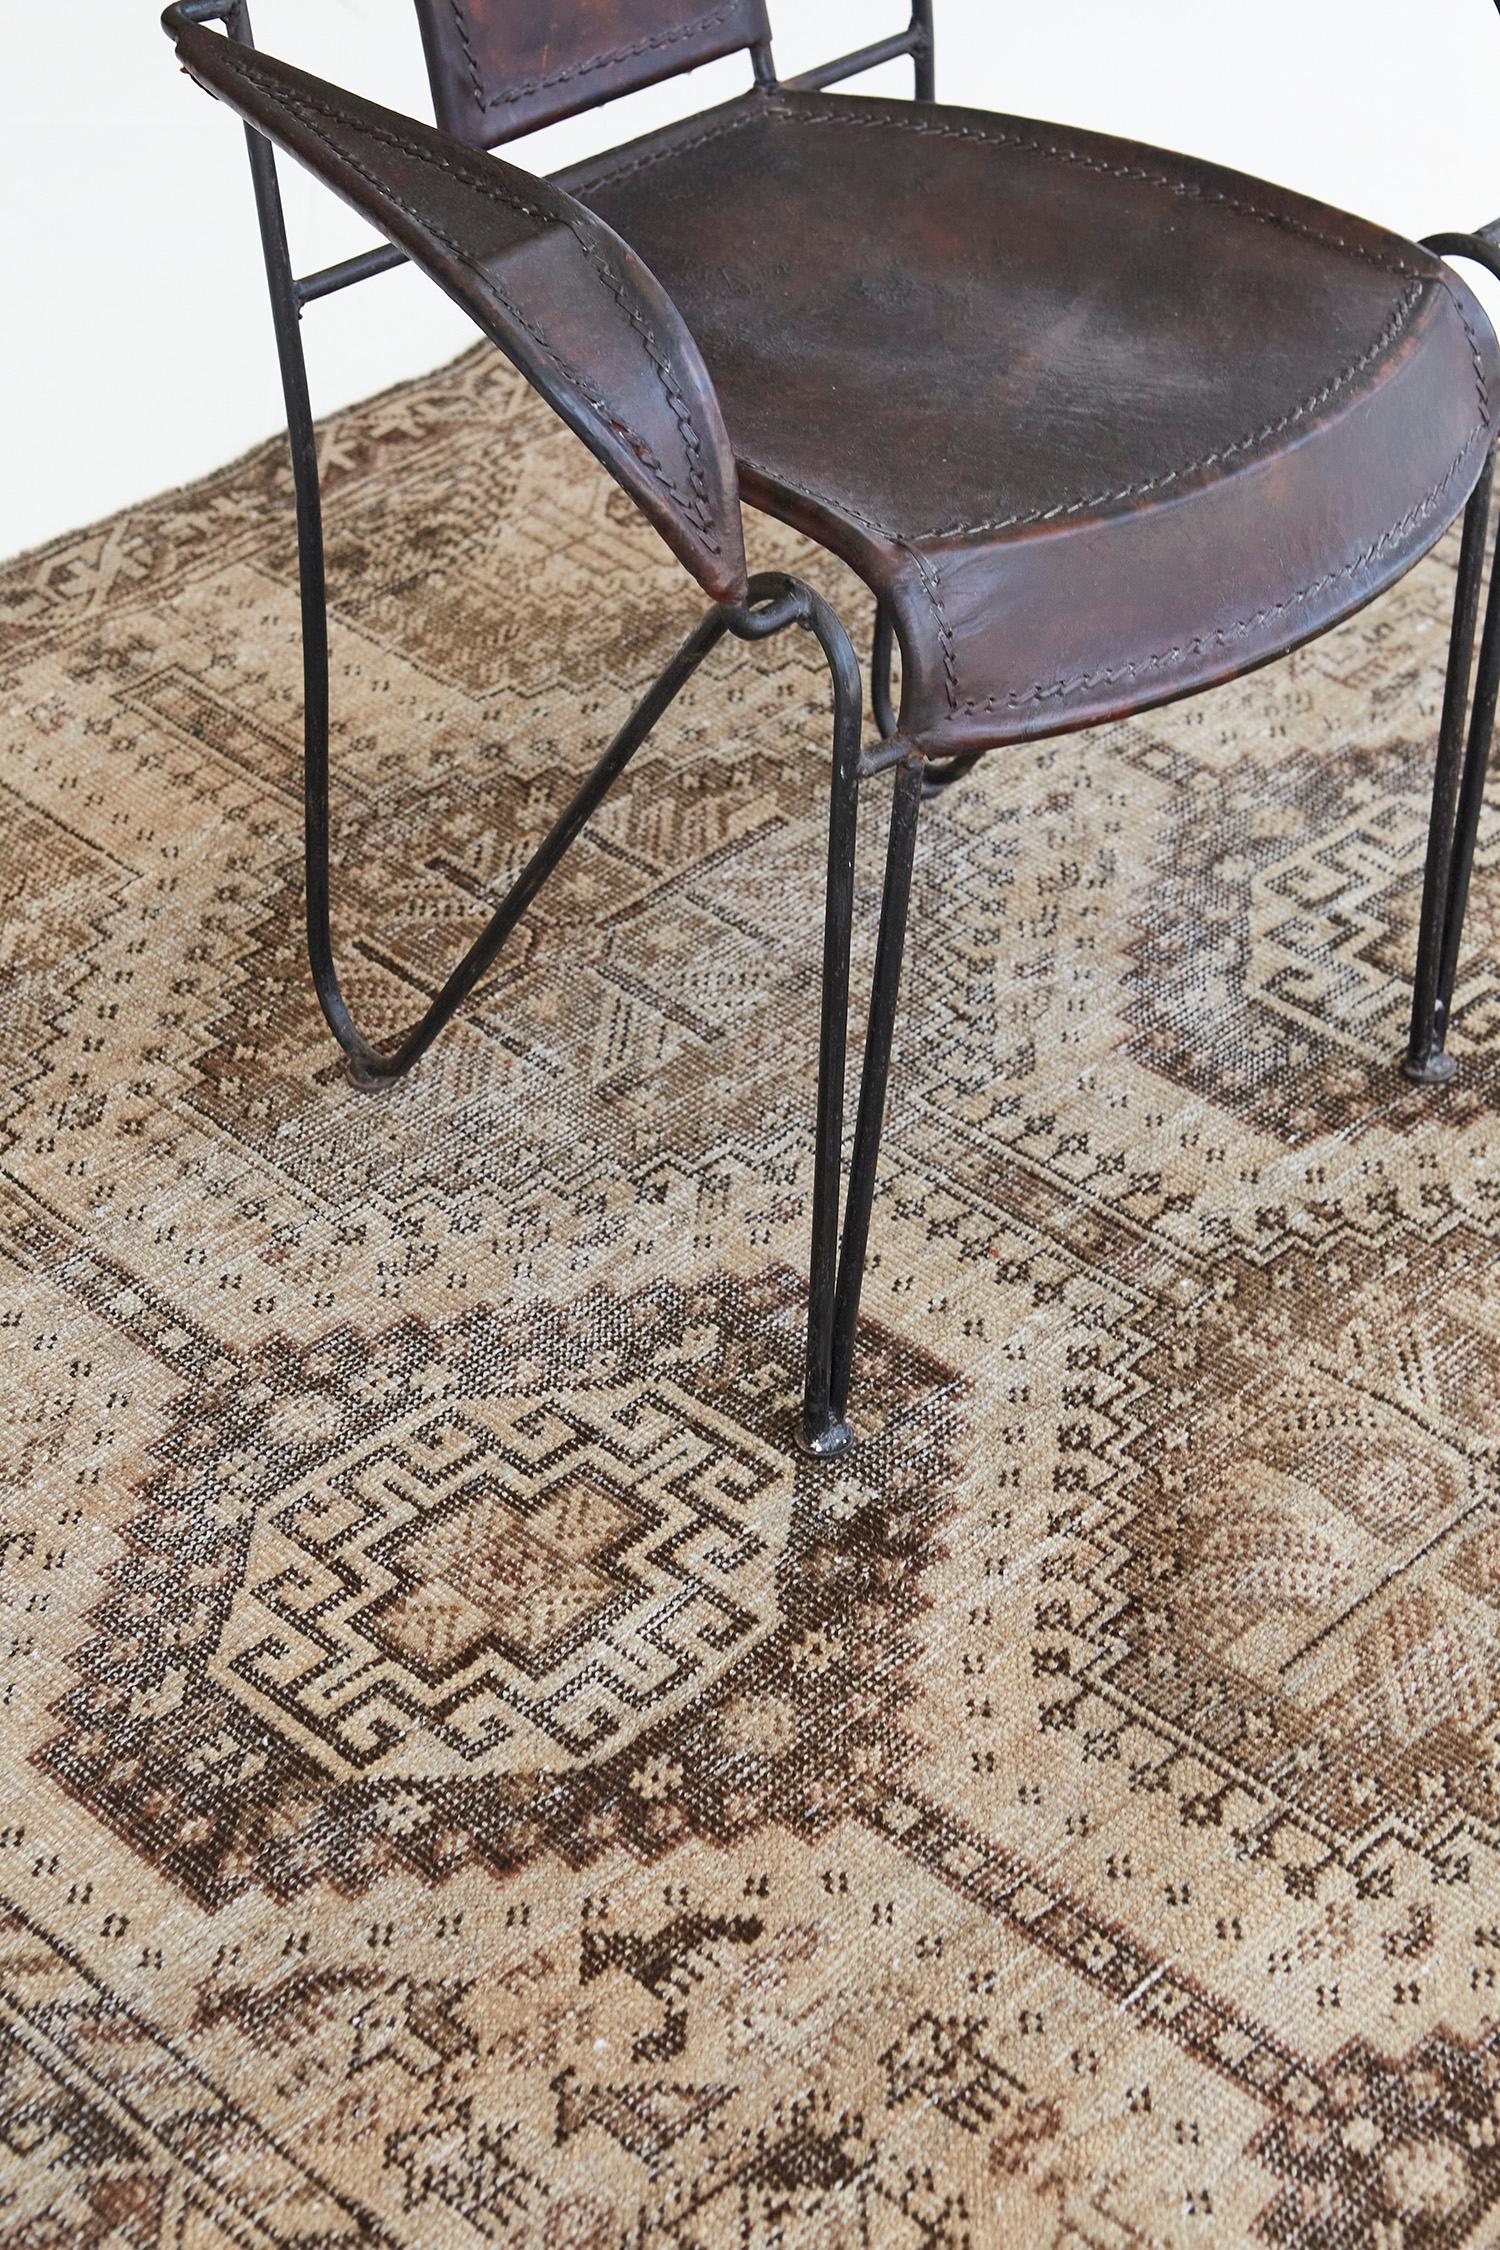 This sophisticated Persian Shiraz vintage rug features a beautiful natural wool pile. It is adorned with cinnamon and a neutral tone that ensembles motifs and symbols following Cyrus' horses. Series of grandiose medallions, geometrical motifs, and